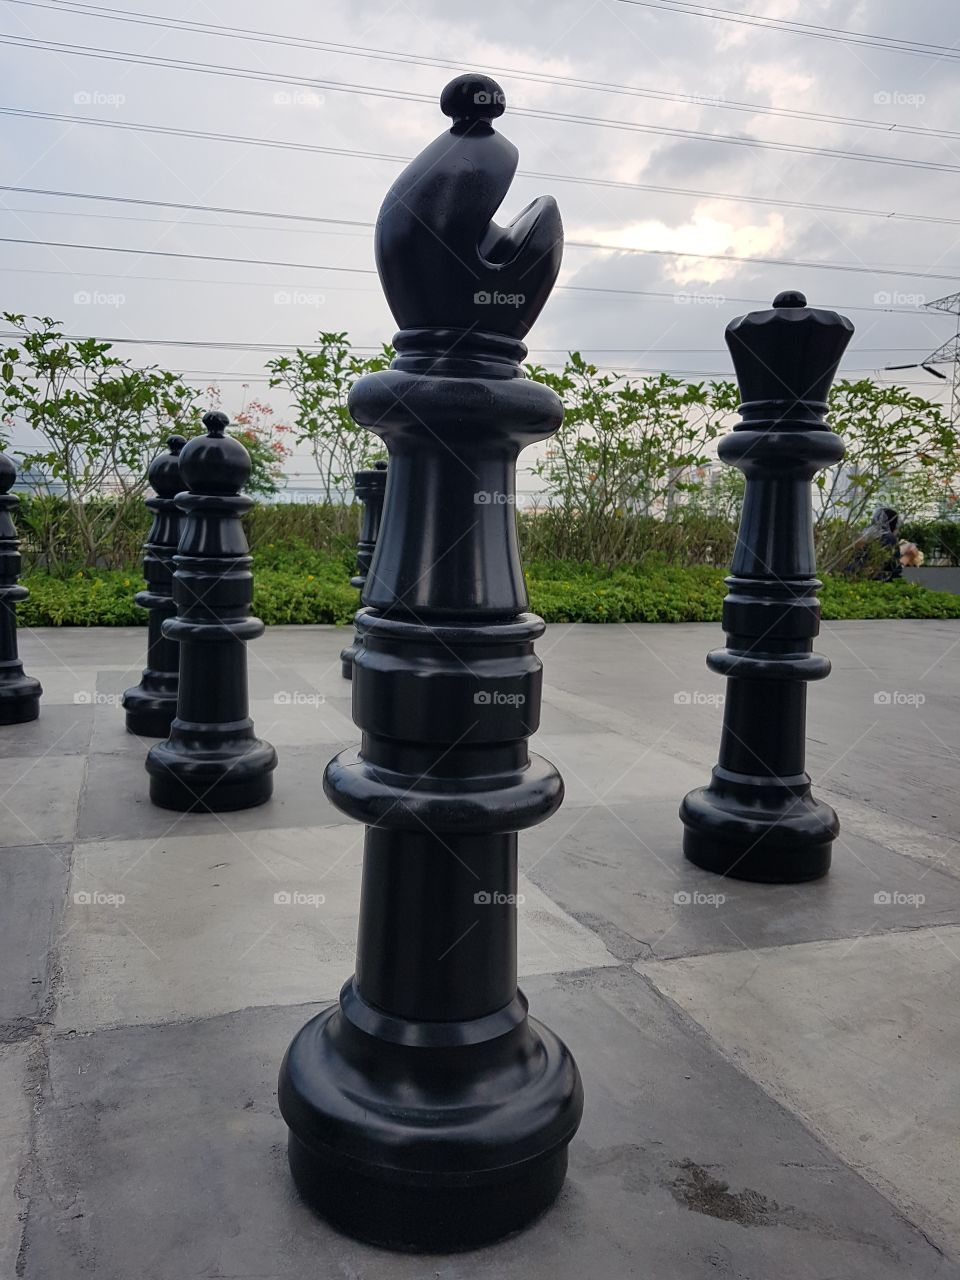 GOMBAK, MALAYSIA - MARCH 23, 2019:A game of bishop-shaped giant chess in a residential park, built by the developer to be played by the local community